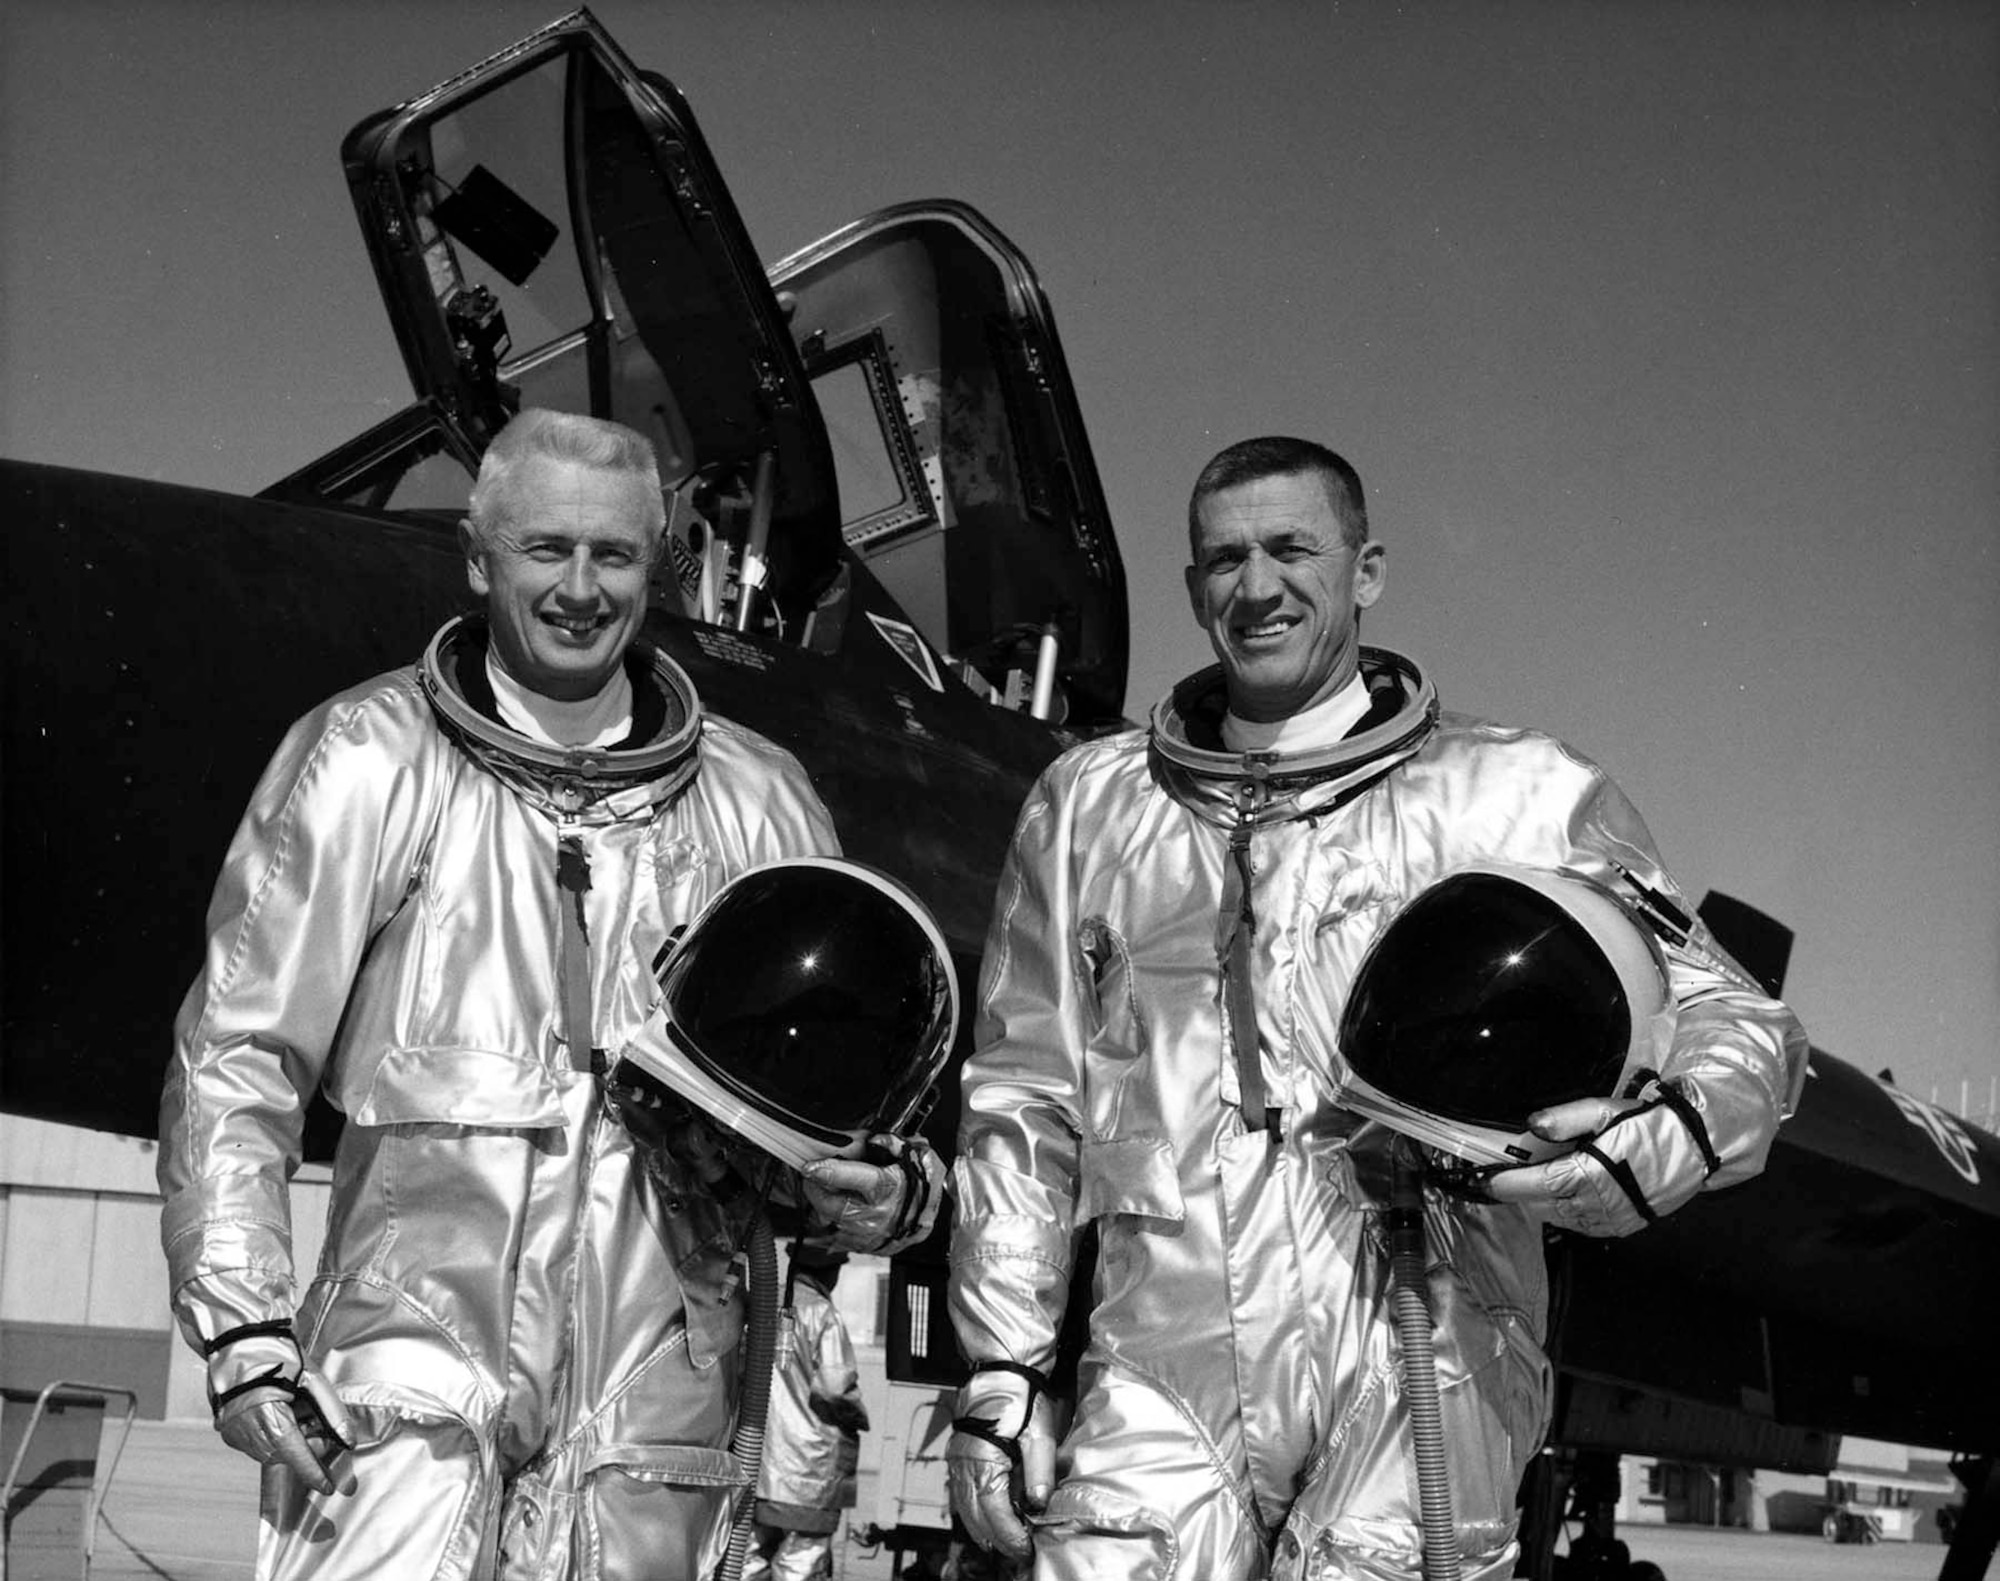 For their YF-12 speed record flight, Col. Robert L. "Fox" Stephens (pilot, left) and Lt. Col. Daniel Andre (fire control officer, right) received the 1965 Thompson Trophy. (U.S. Air Force photo)